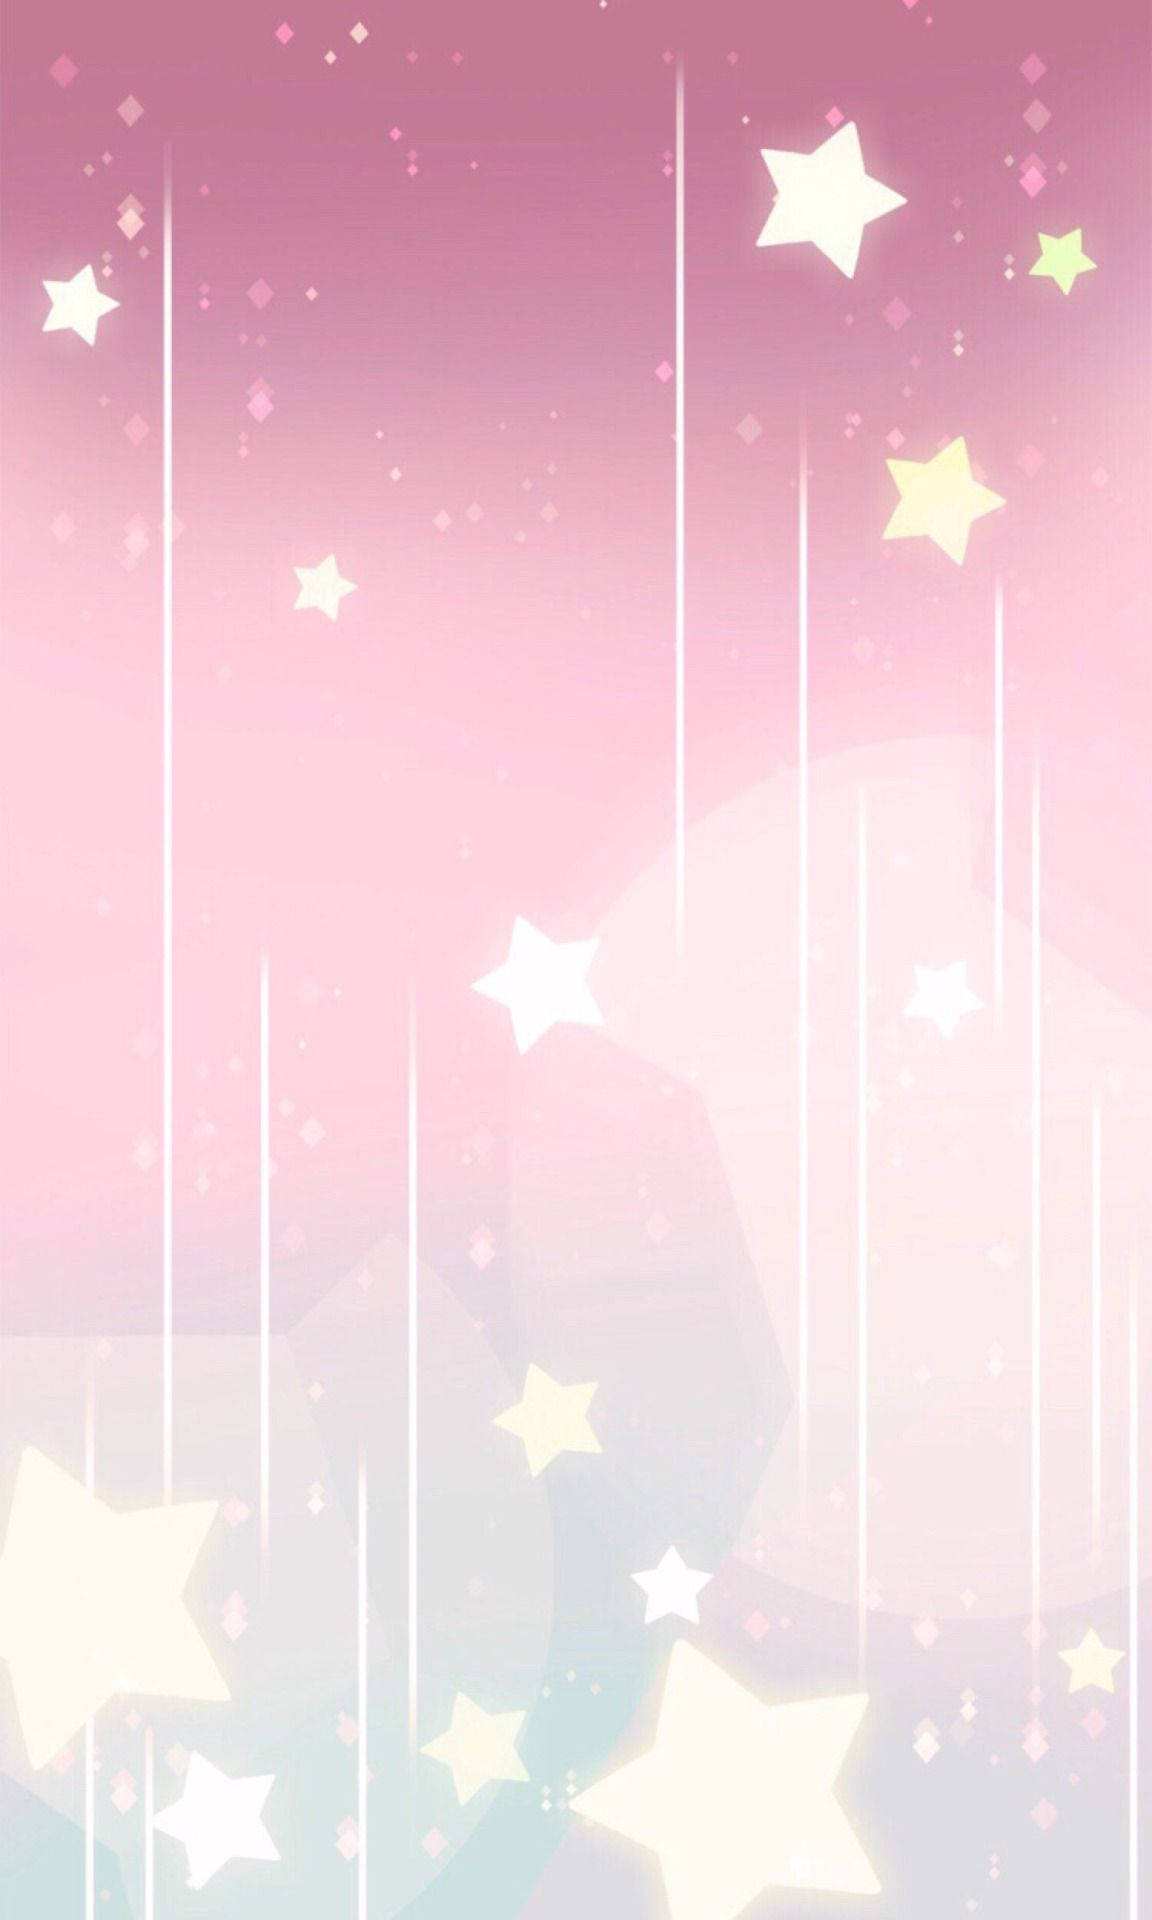 Floating Stars Cute Tablet Theme Background